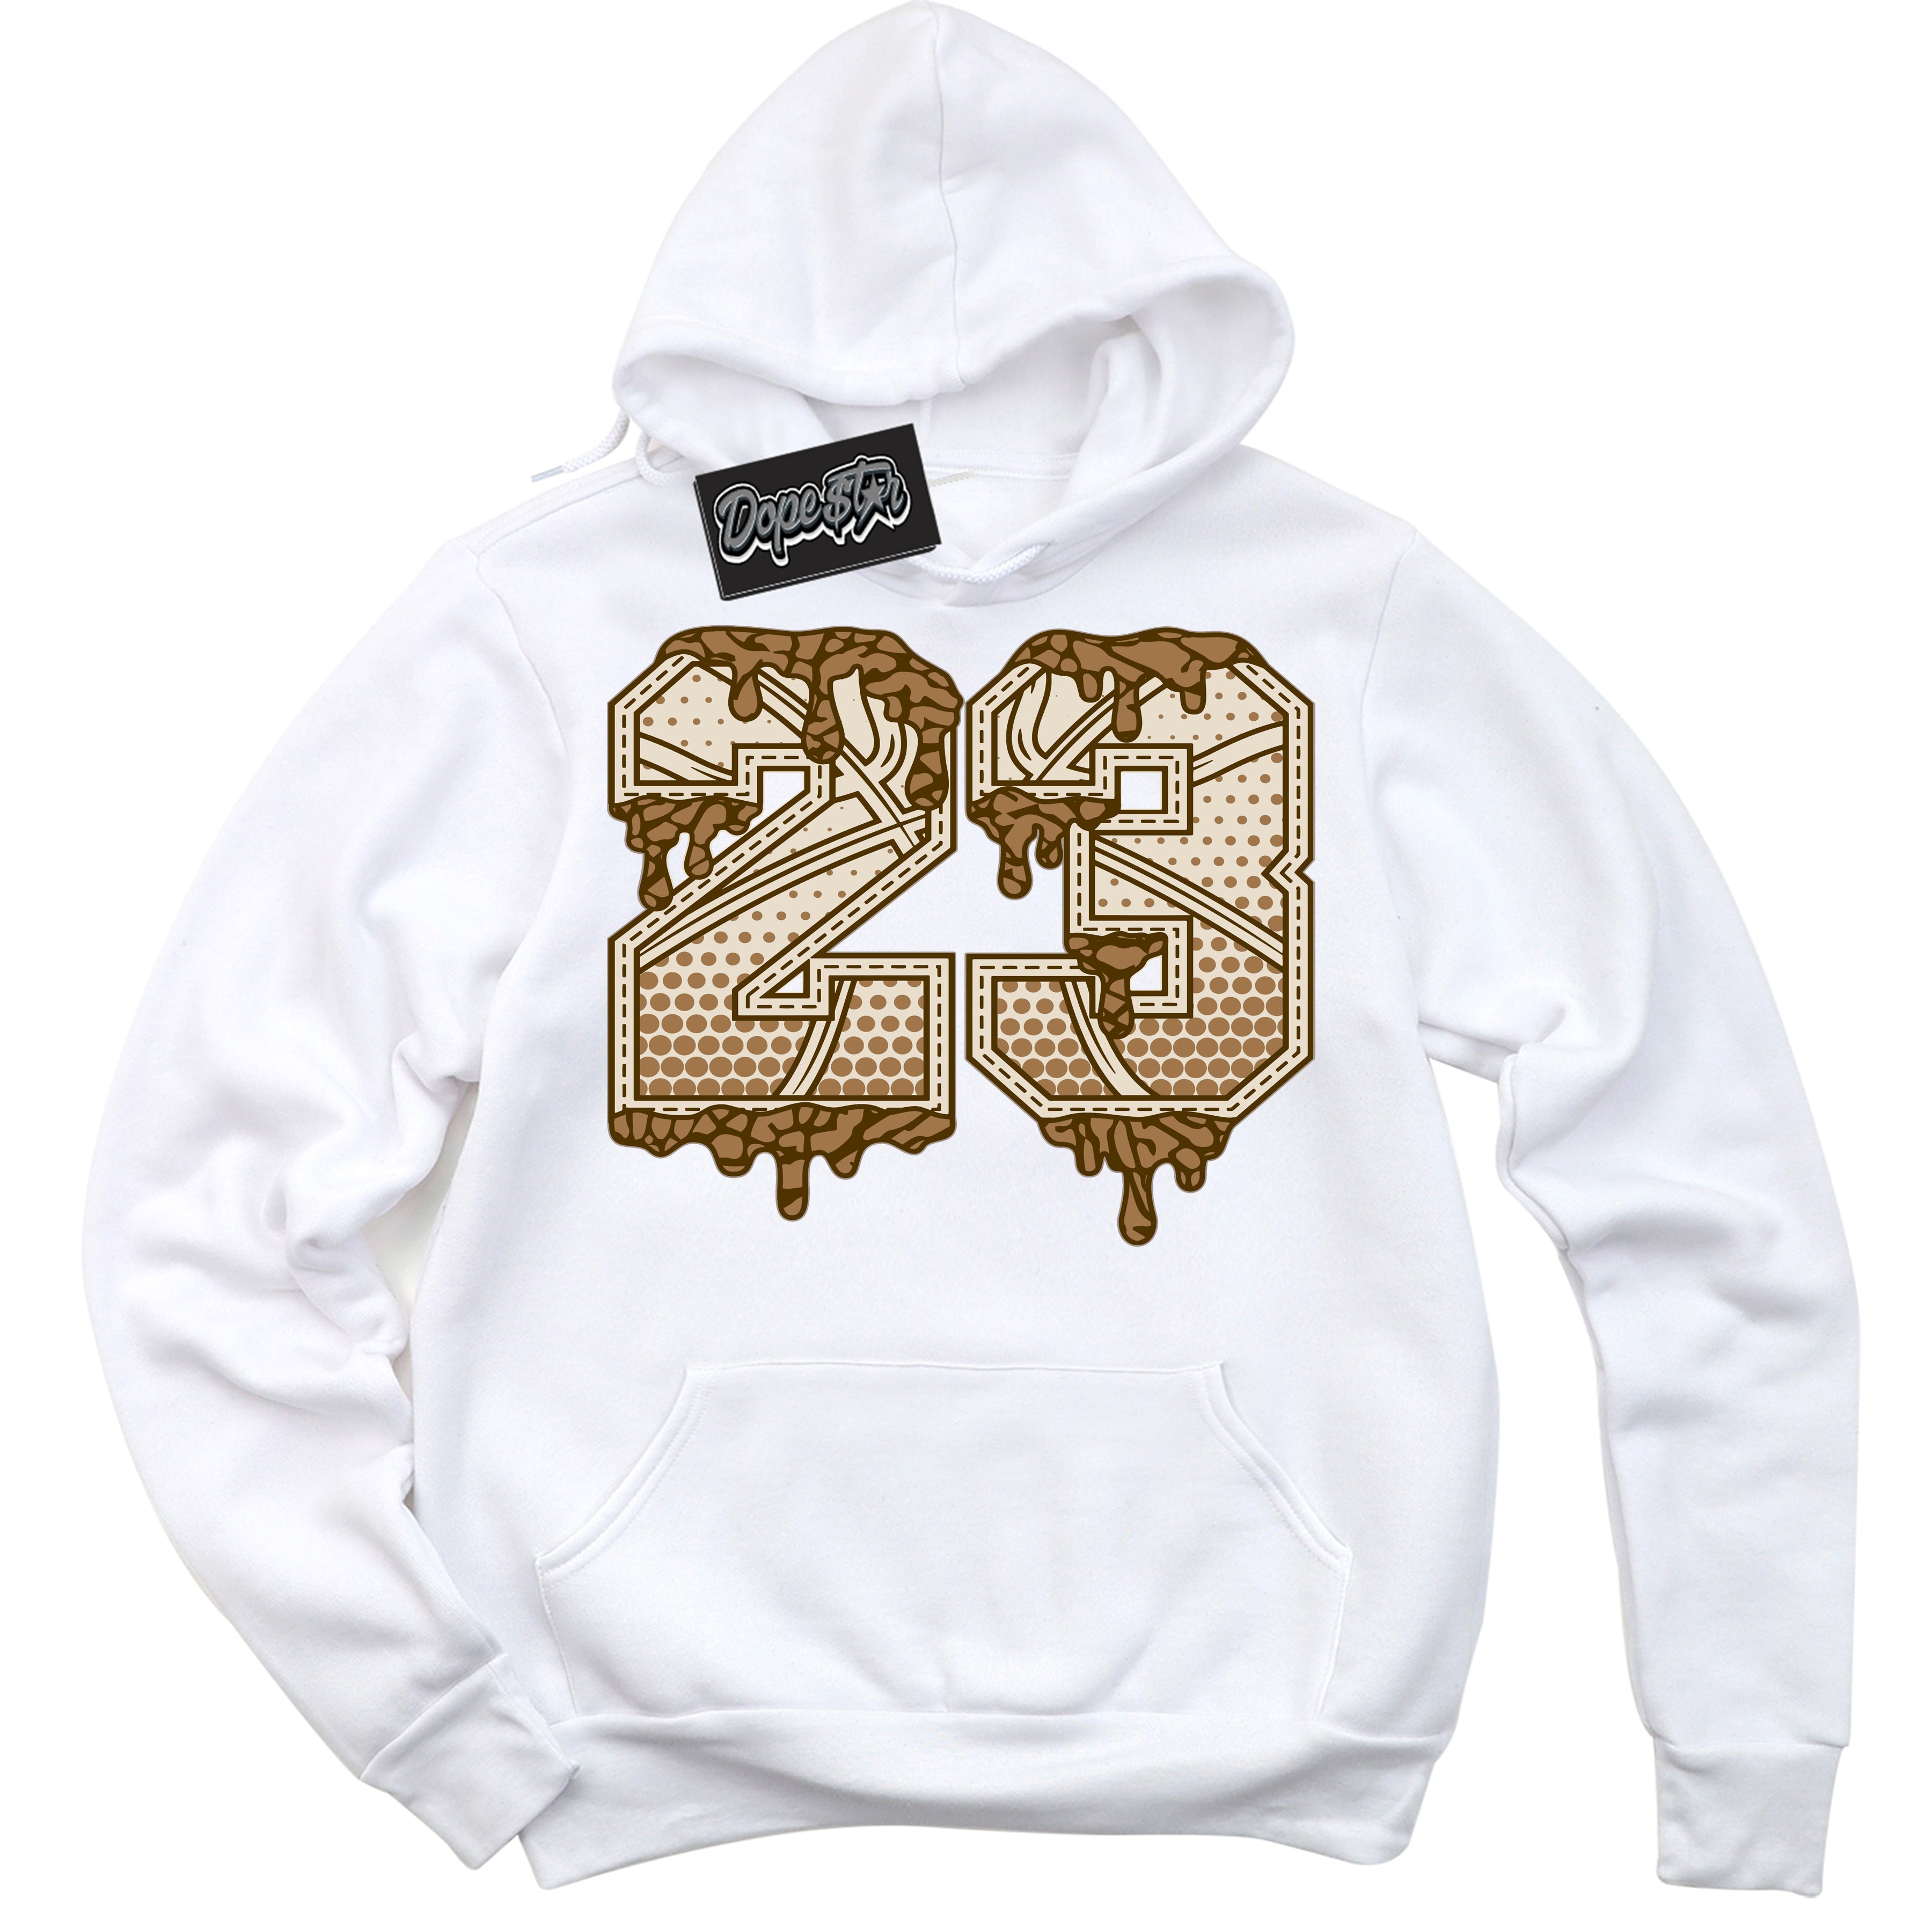 Cool White Graphic DopeStar Hoodie with “ 23 Ball “ print, that perfectly matches Palomino 3s sneakers